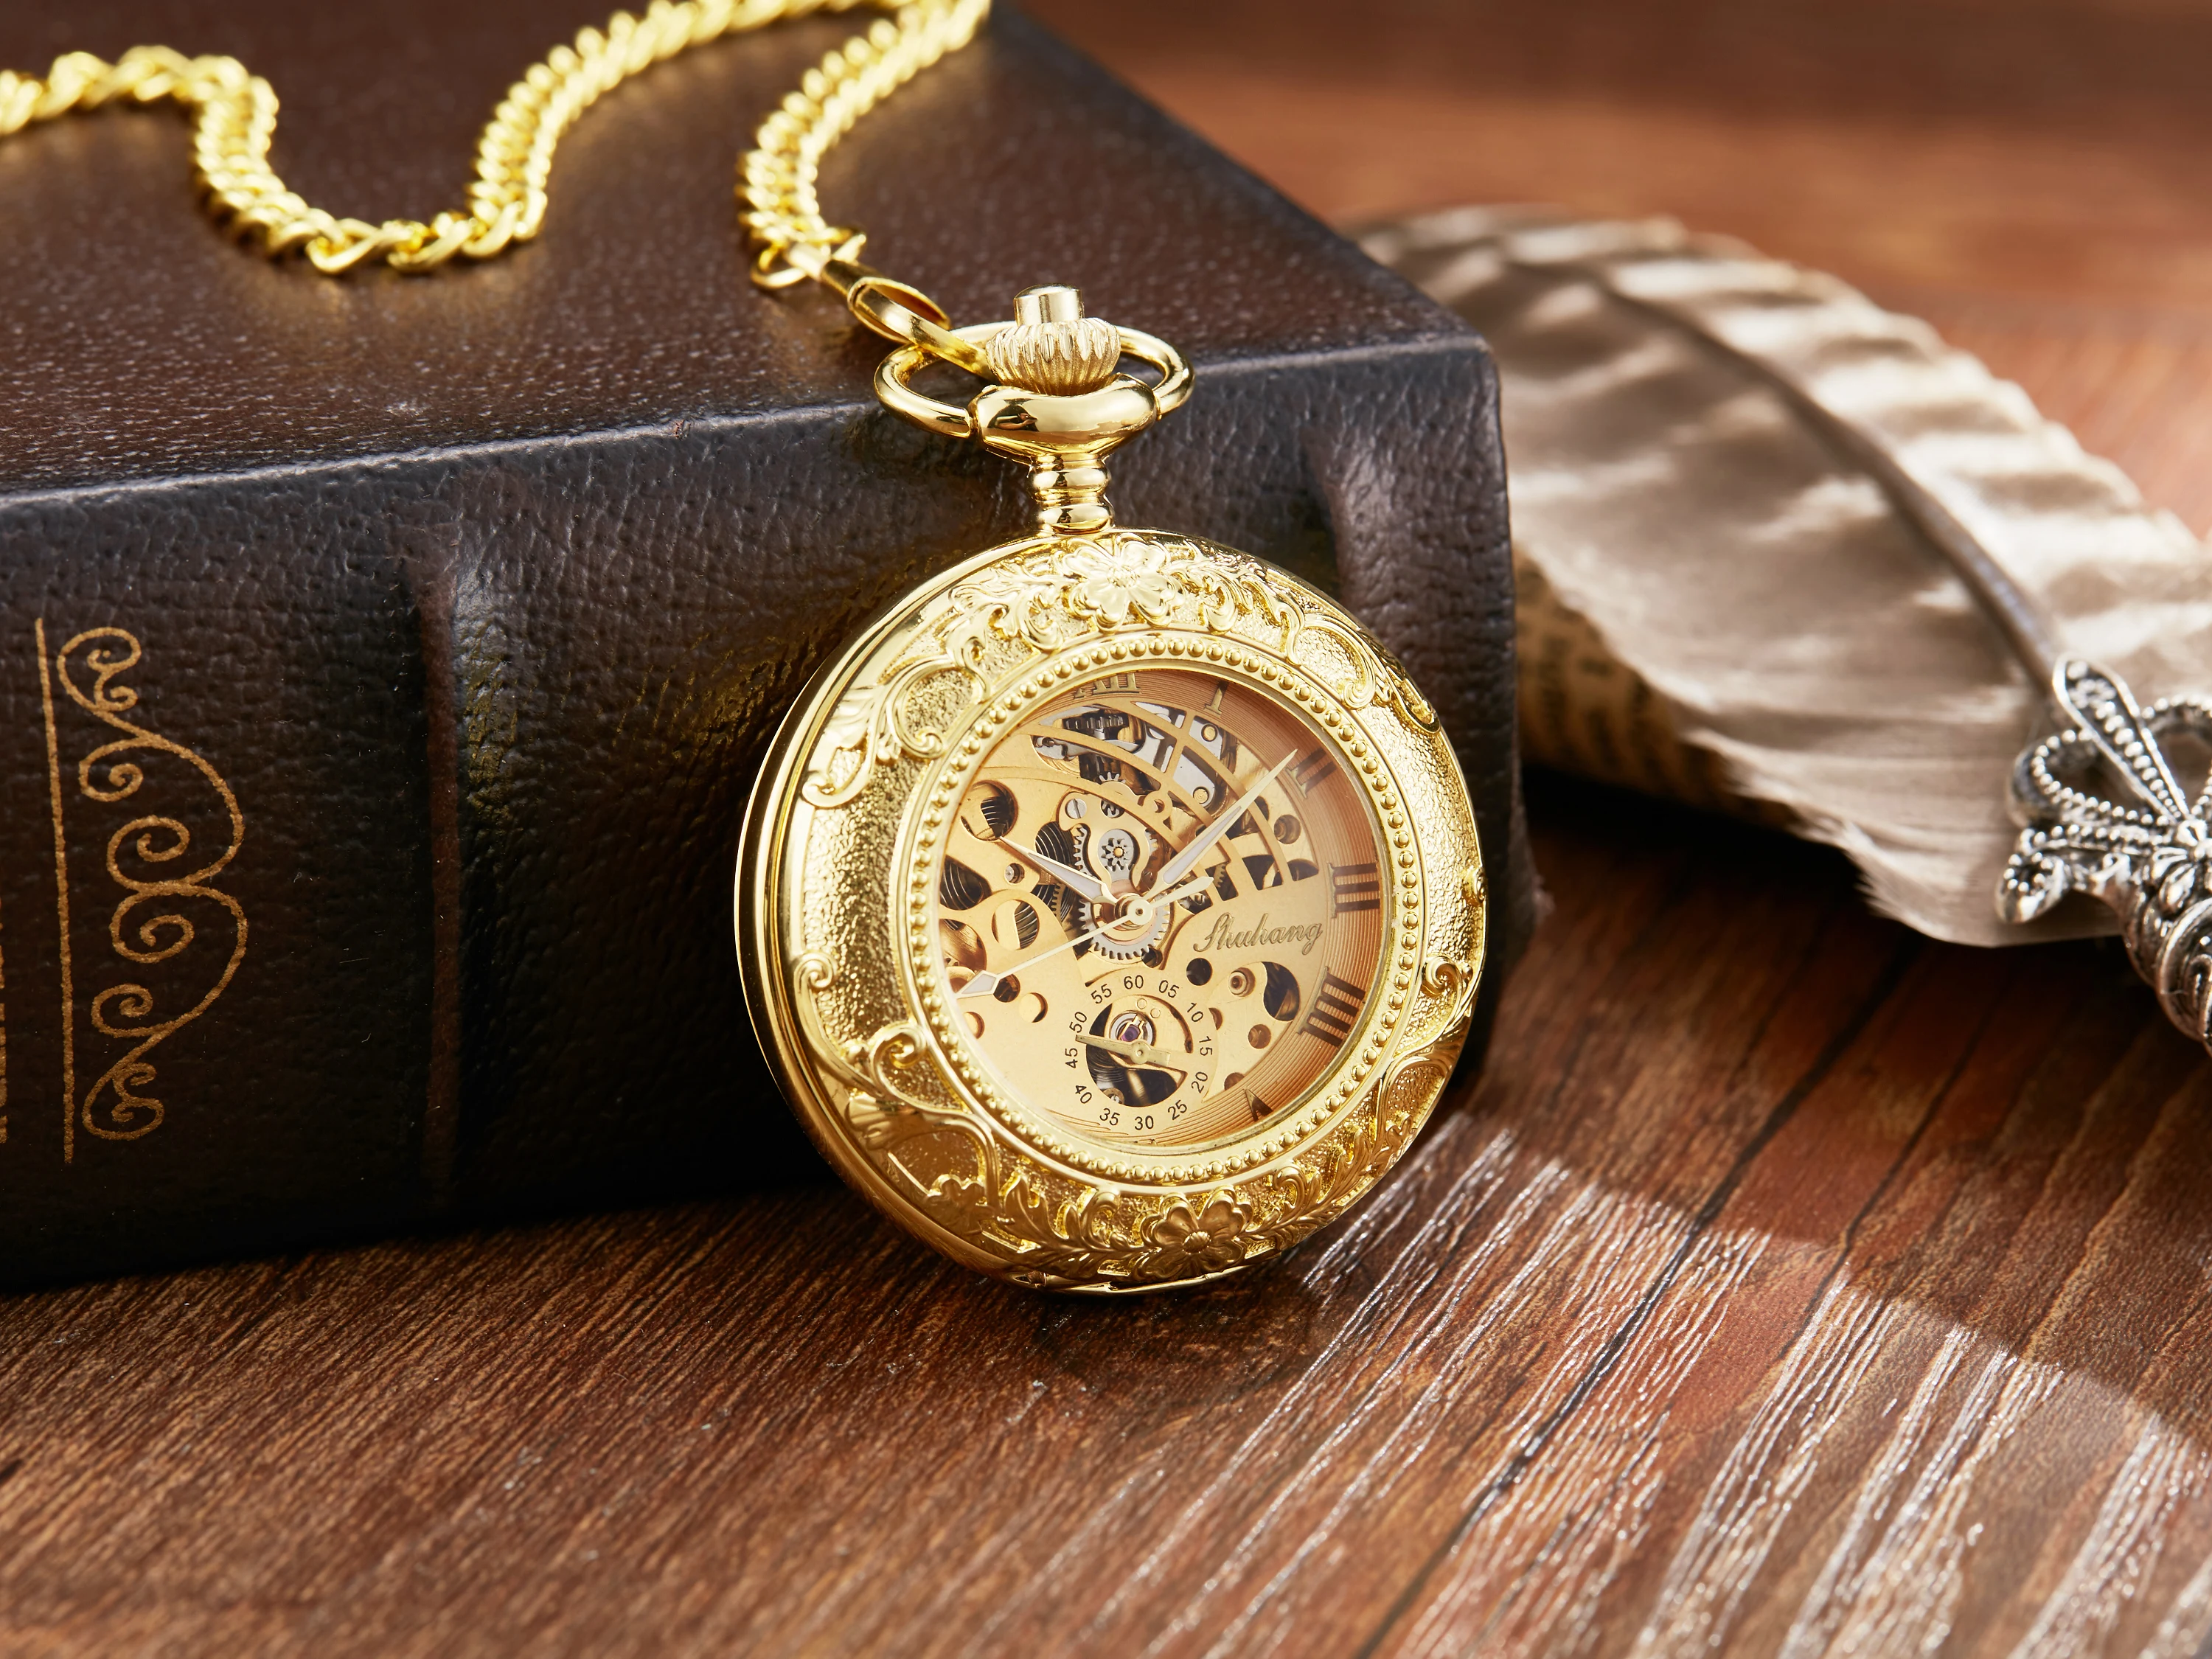 Vintage 2 Sides Open Case Mechanical Men Watch Double Face Roman Dial Clock Steampunk Hand Wind Pocket Watch With FOB Chain Gift natural wooden fob watch with decorative dials round open face wood chain watch silver chain birthday gift montre de poche homme